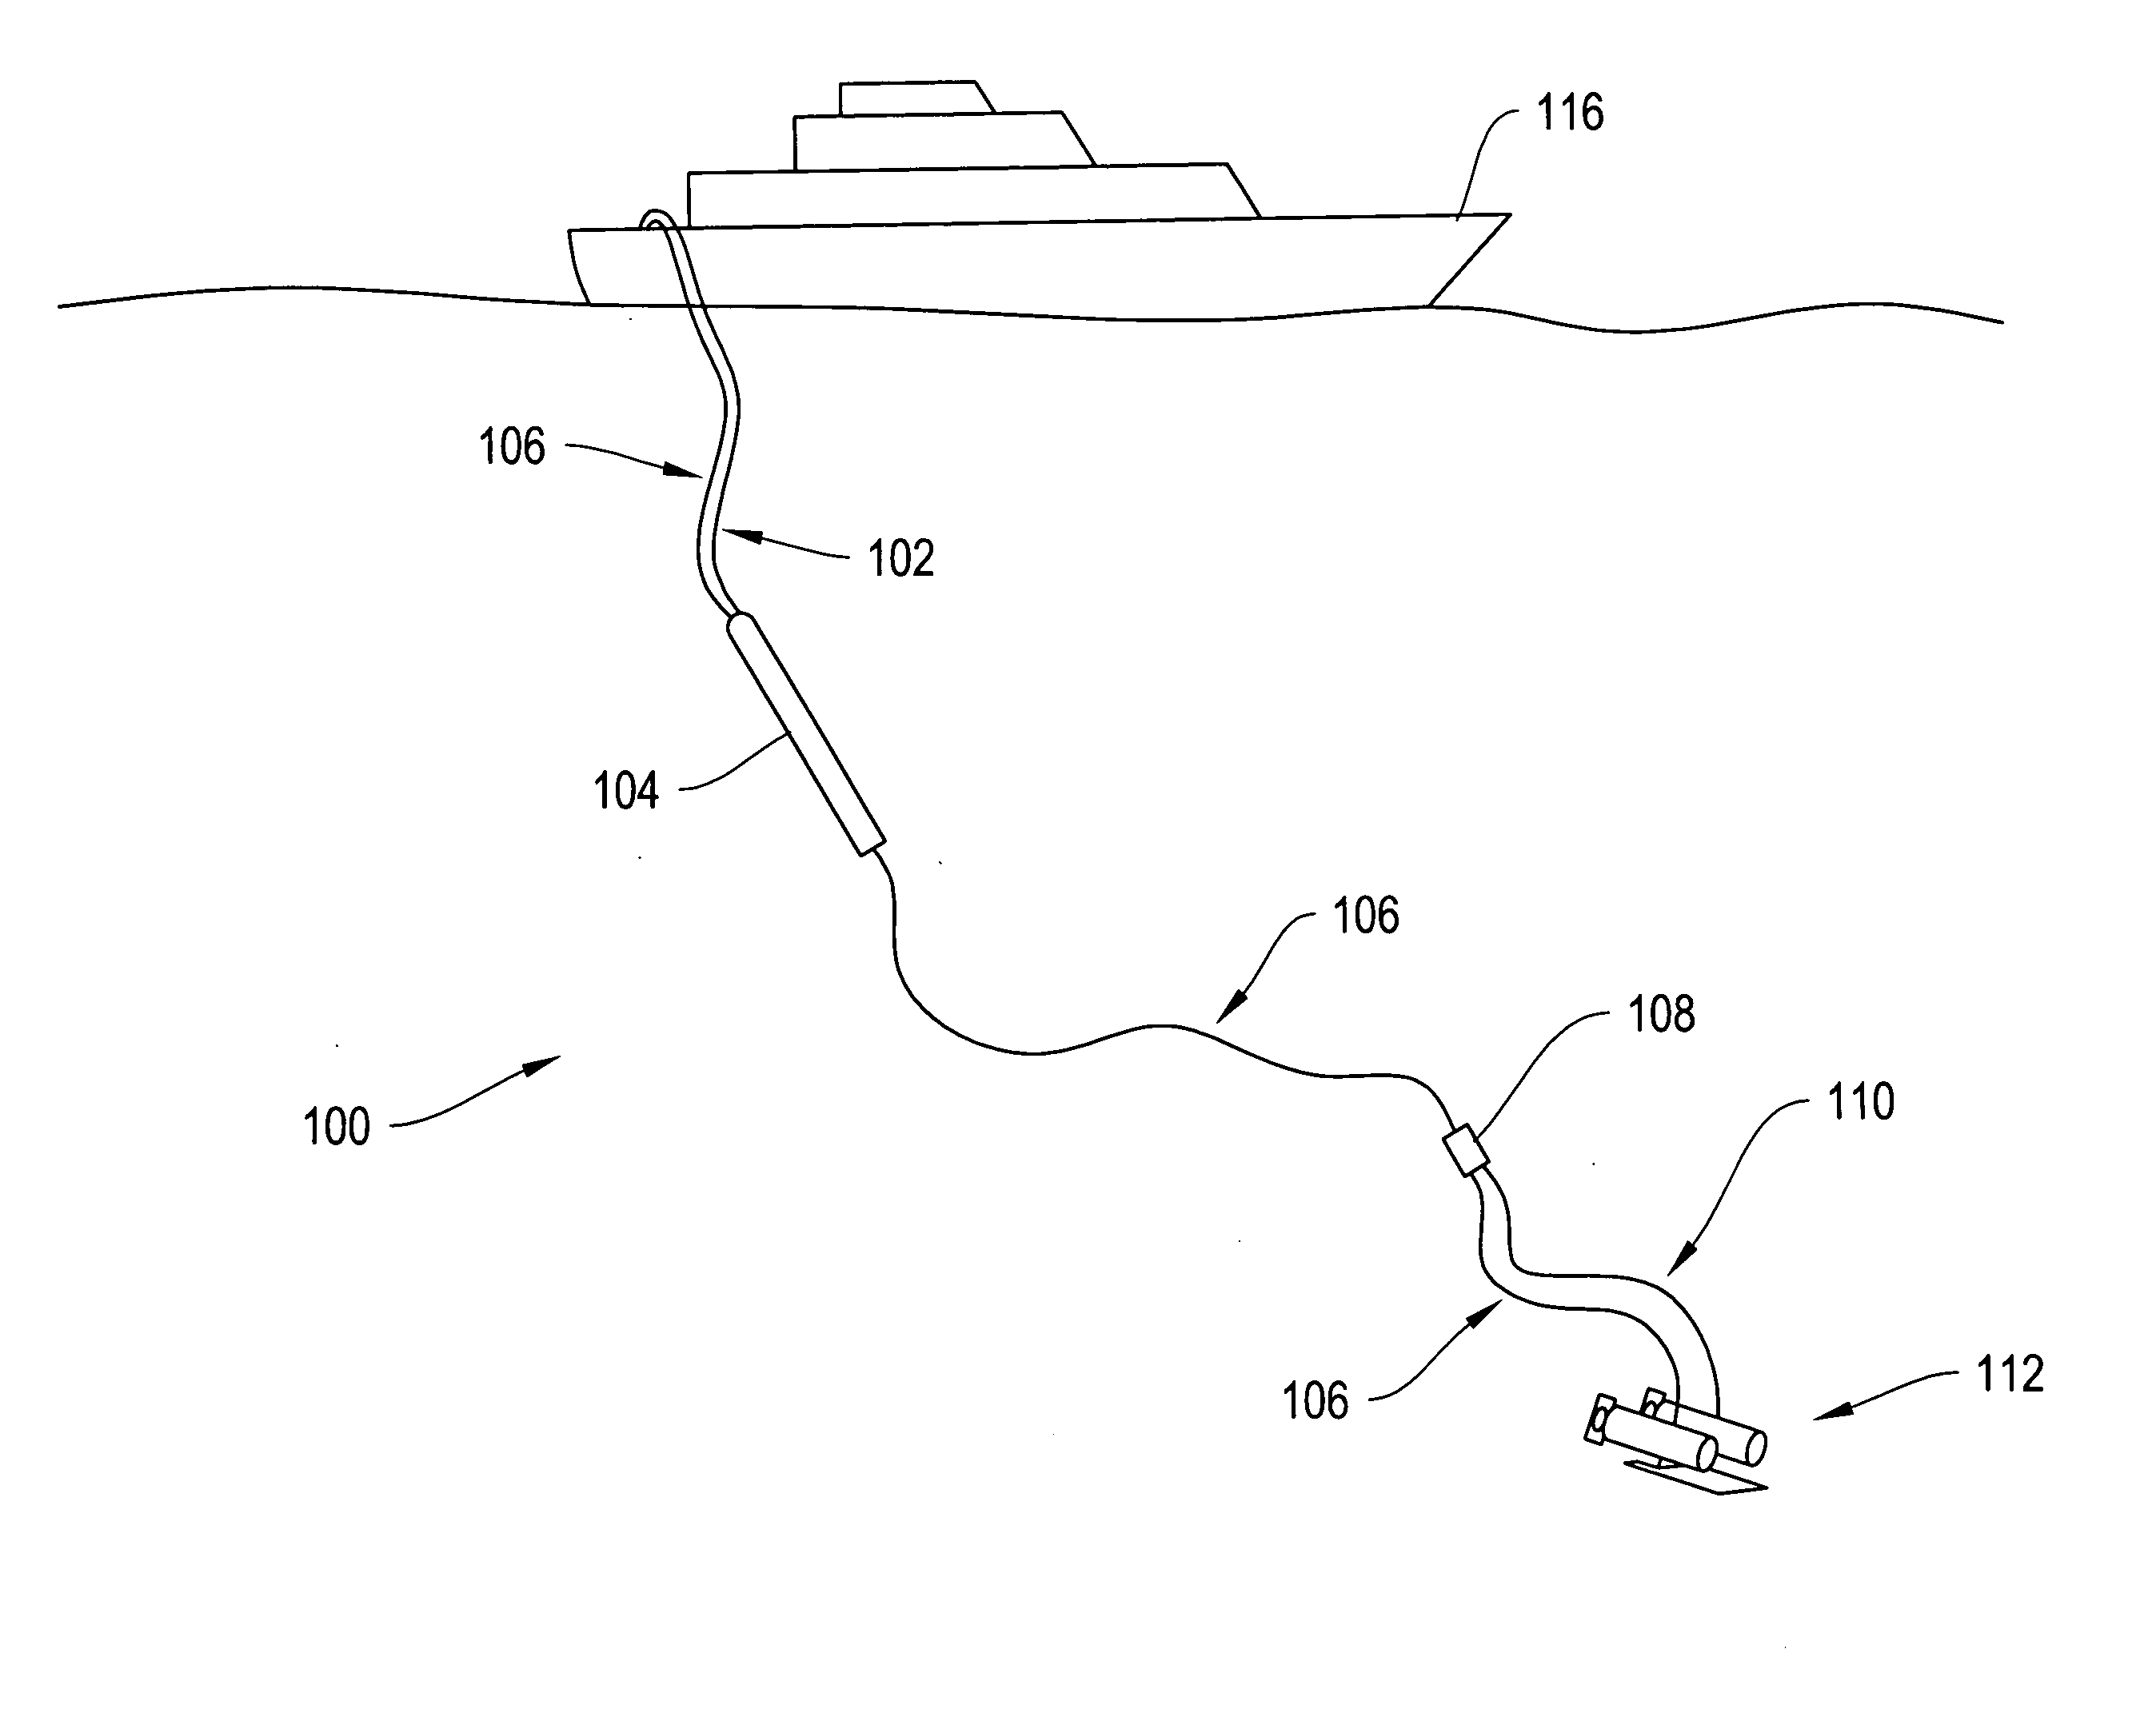 Systems and methods for tethering underwater vehicles